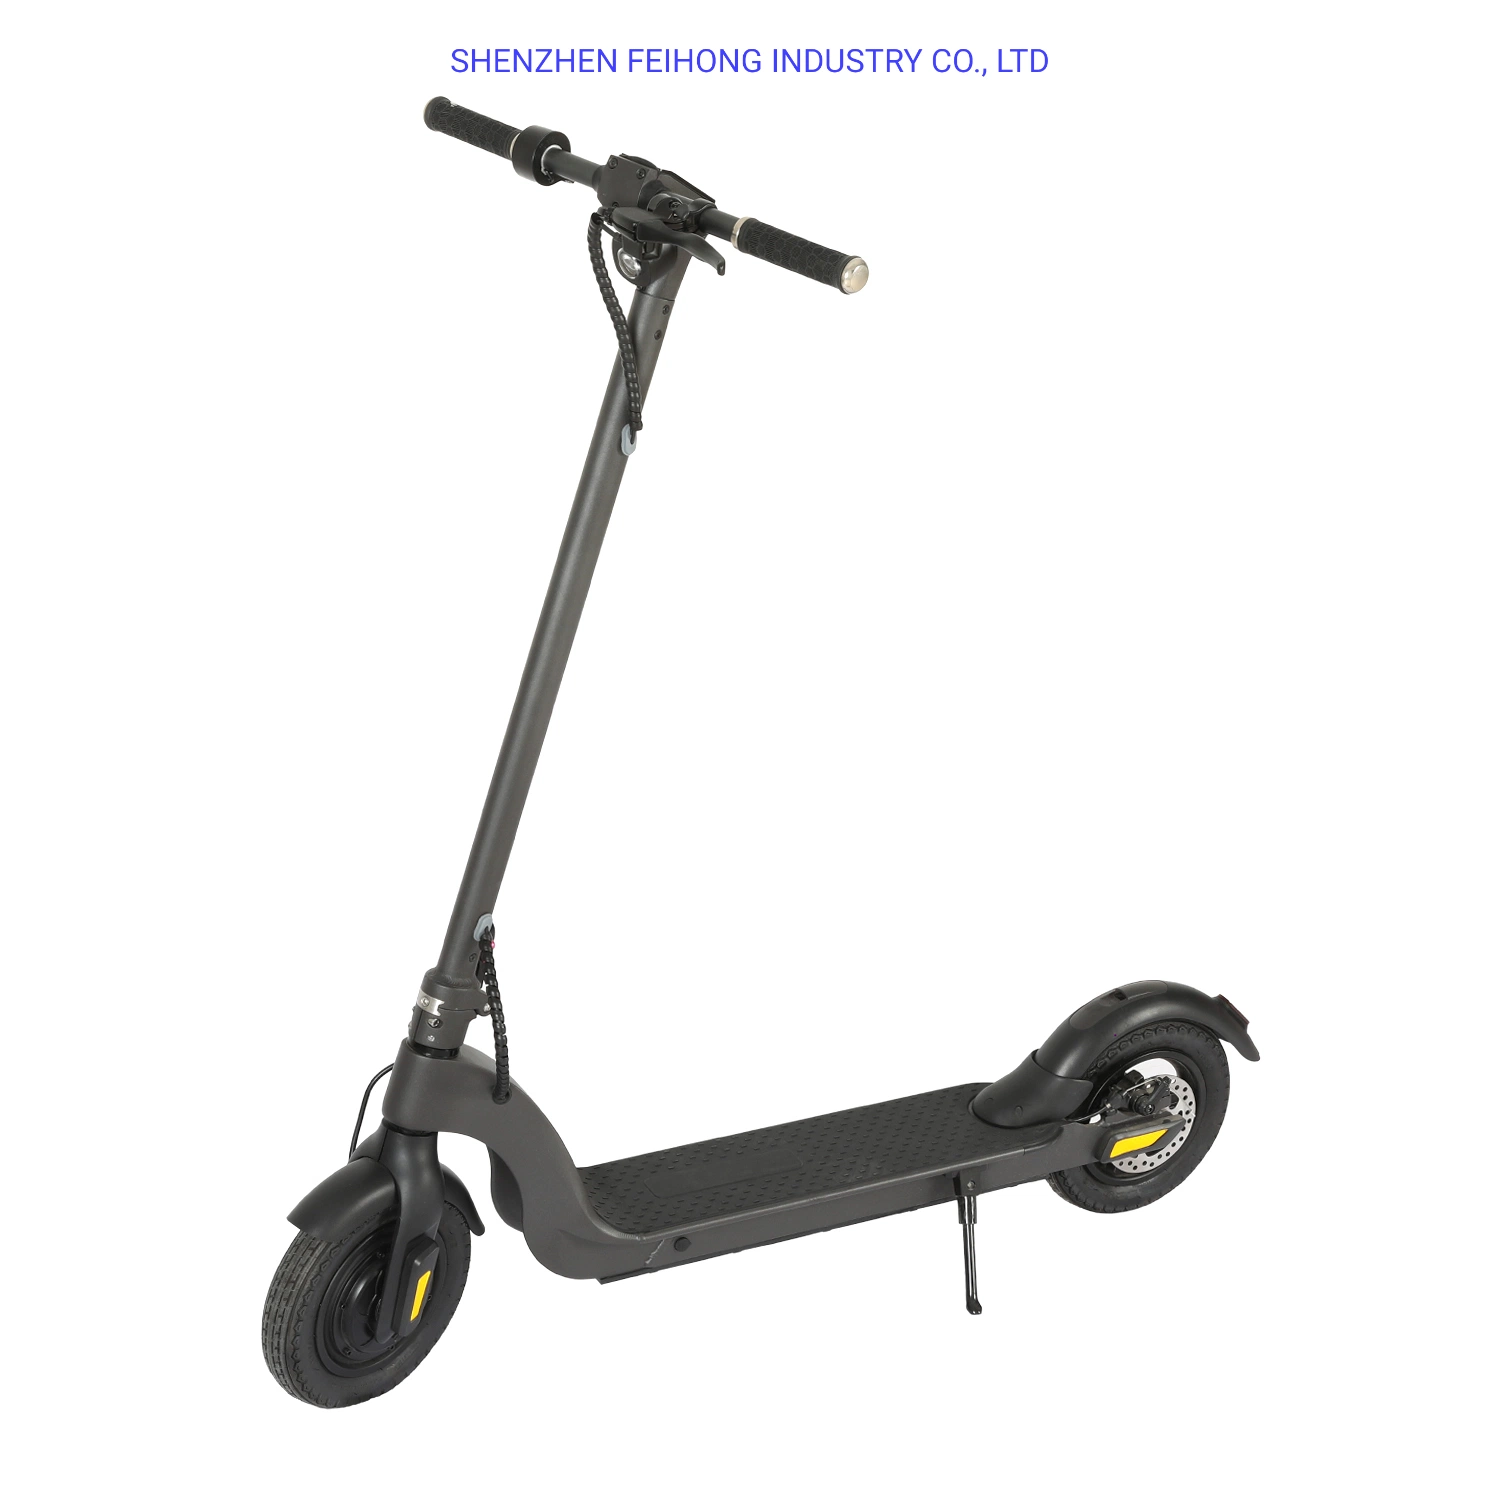 Motorcycle Electric Scooter Bicycle Electric Bike Electric Motorcycle Scooter Motor Scooter 36V 7.8ah 350W Motor Adult Scooter Ecoolpa Self Balancing Scooter